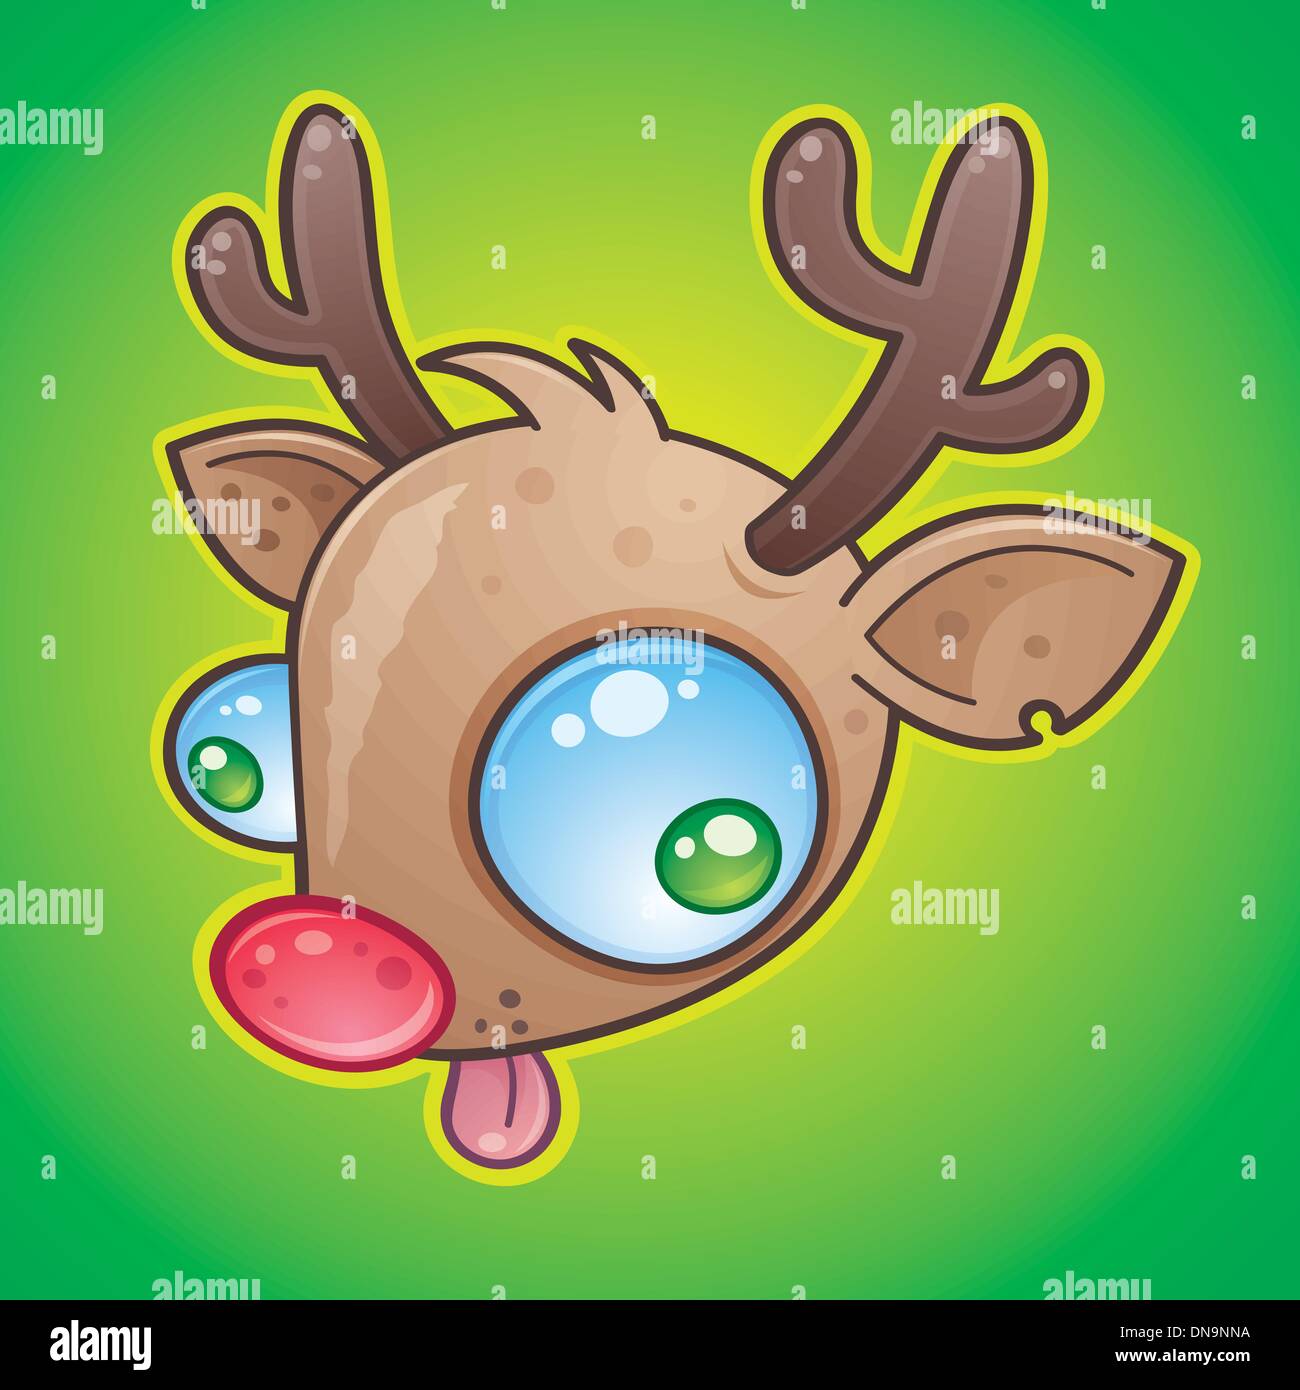 Rudolph The Red Nosed Reindeer Stock Vector